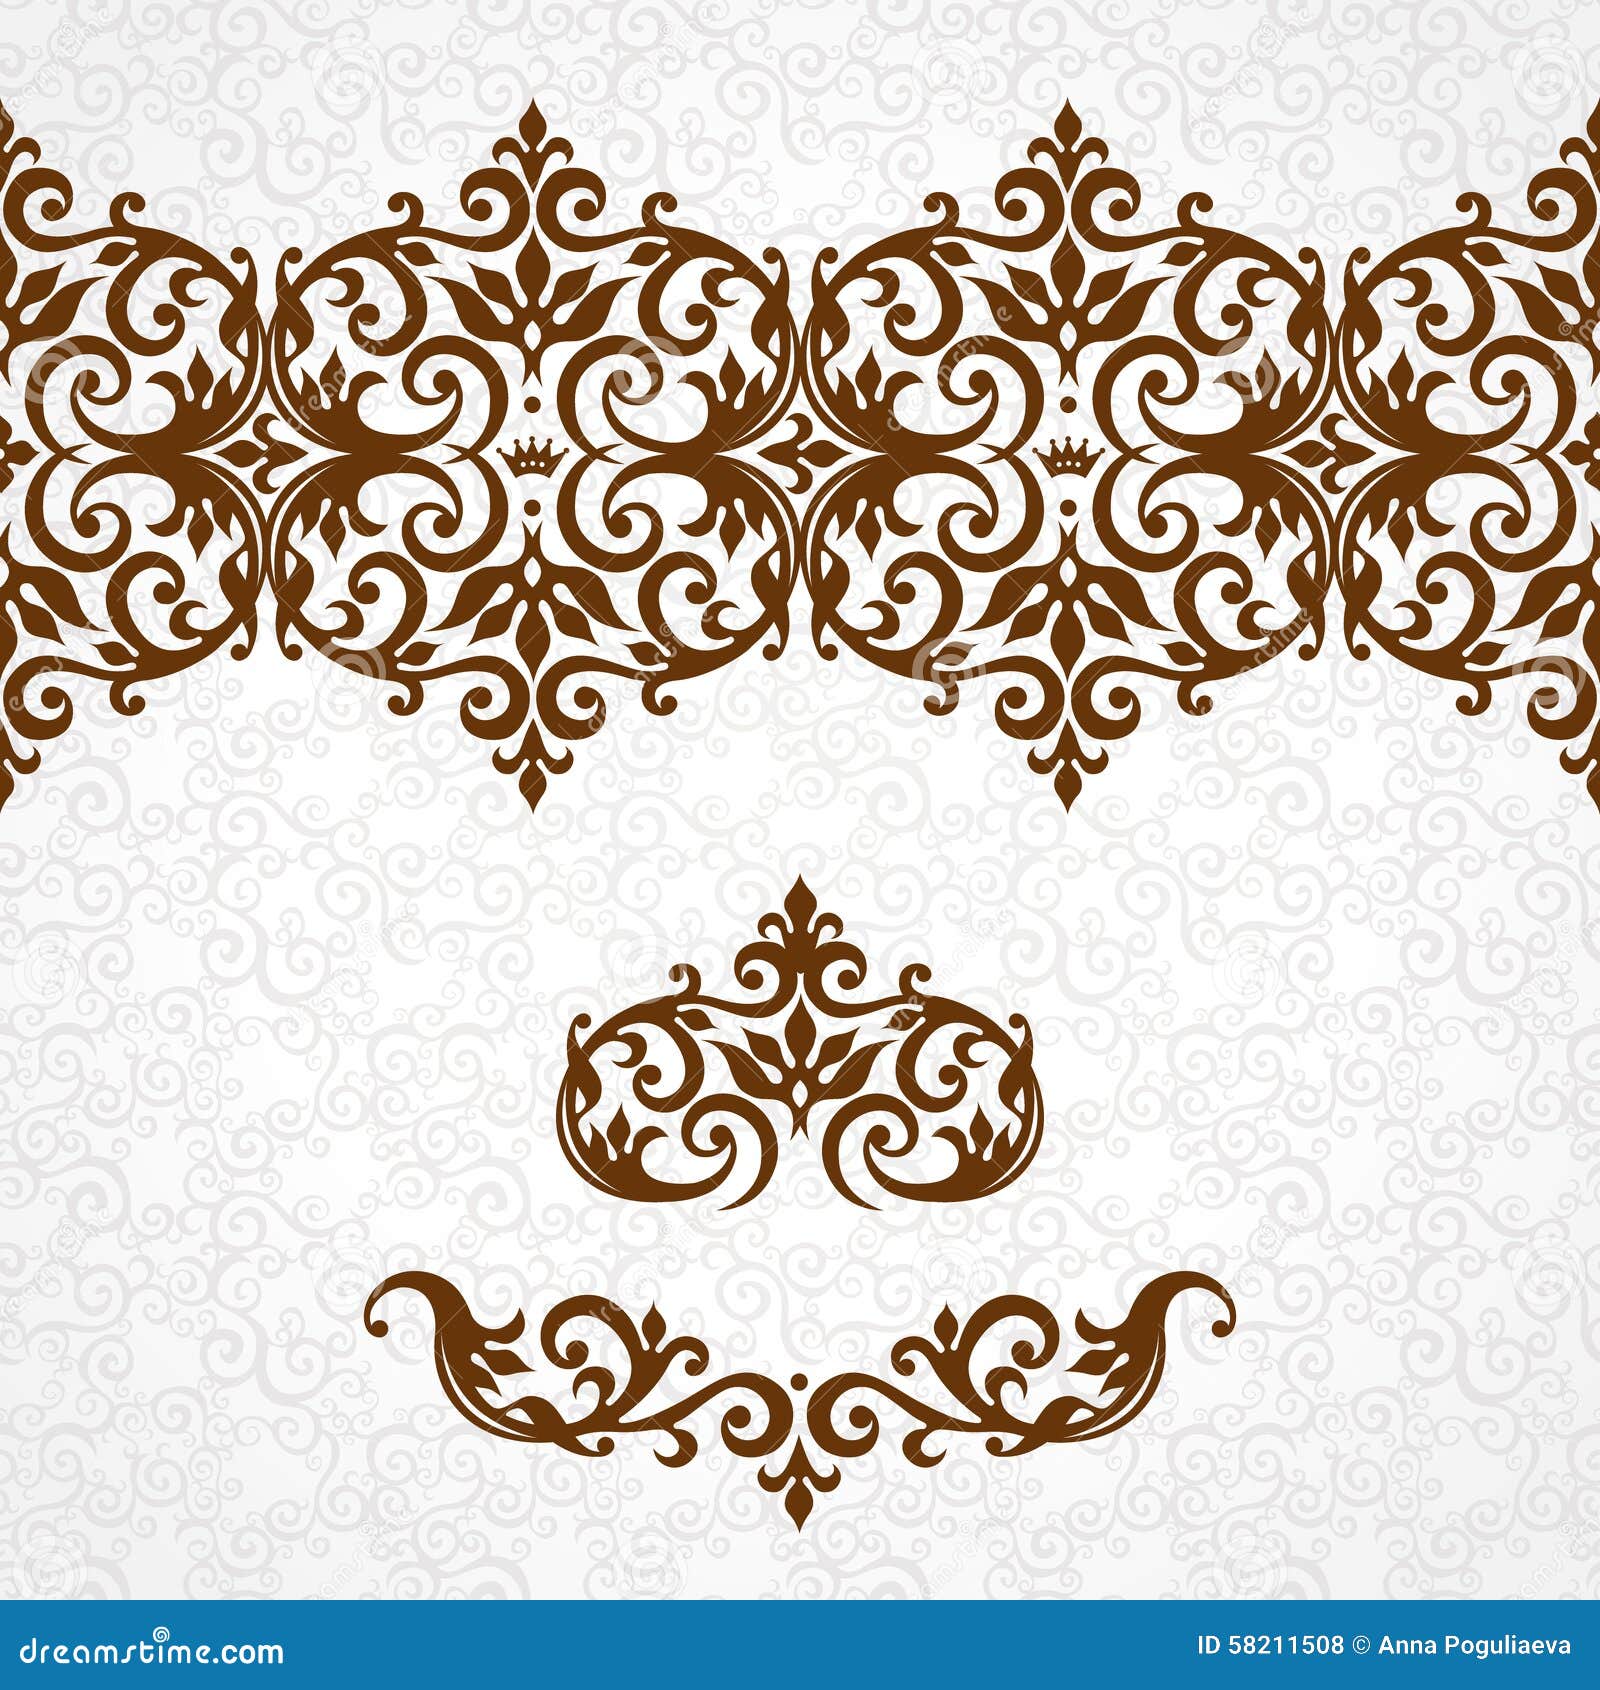 Vector Ornate Seamless Border in Victorian Style. Stock Vector ...